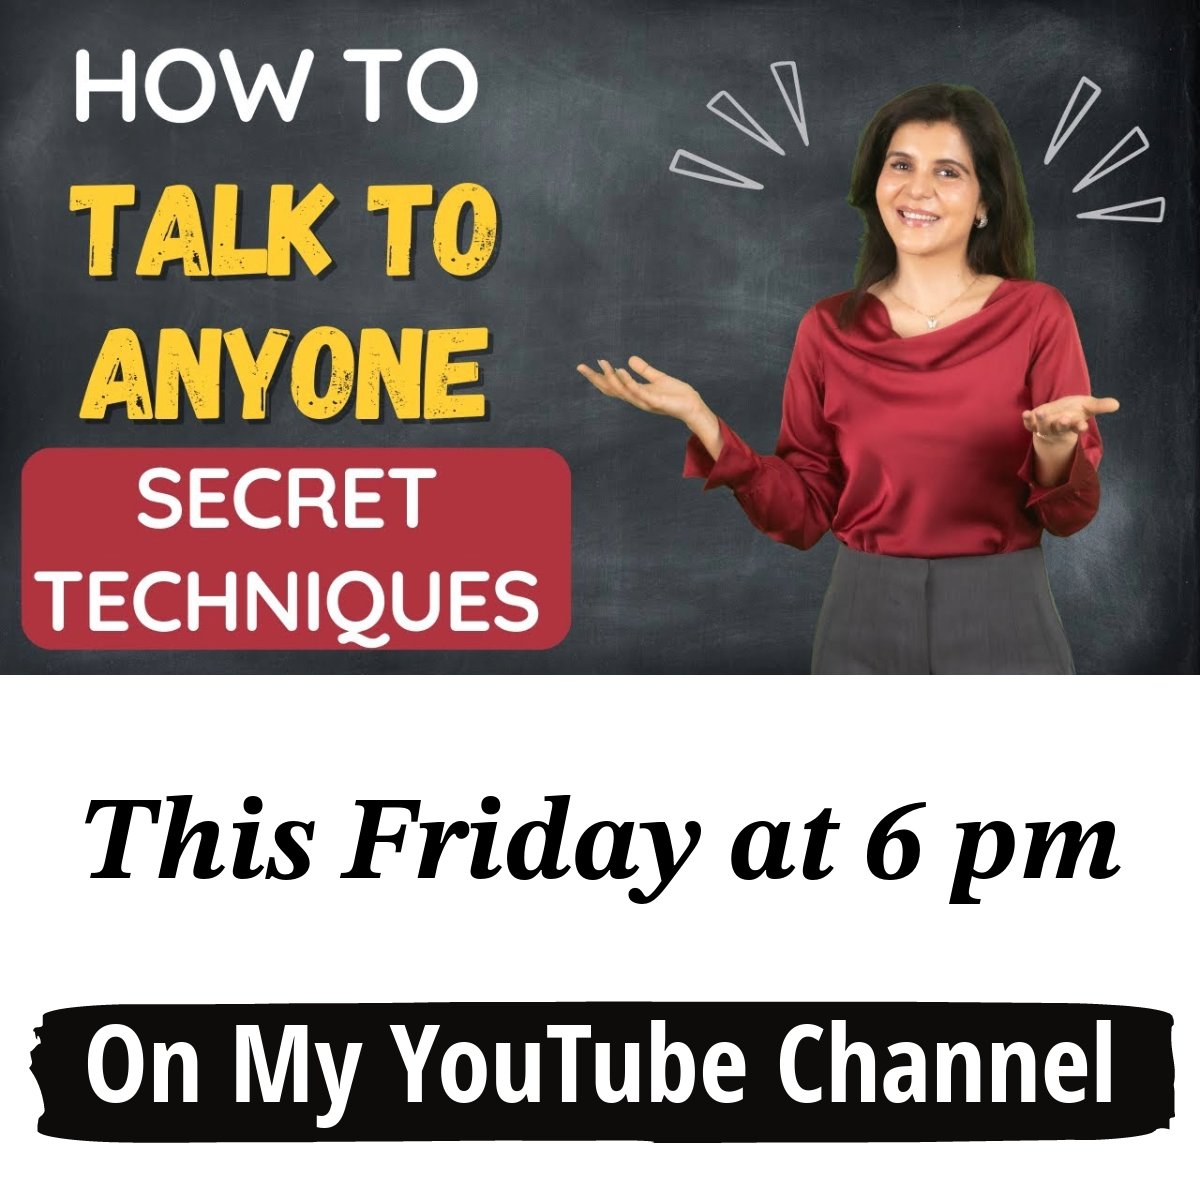 My Secret Techniques: Talk to Anyone with Confidence?
Don't miss out this IMPORTANT video 📷
22nd Sep. at 6 pm! (IST).
.
.
#ChetChat #howtotalktoanyone